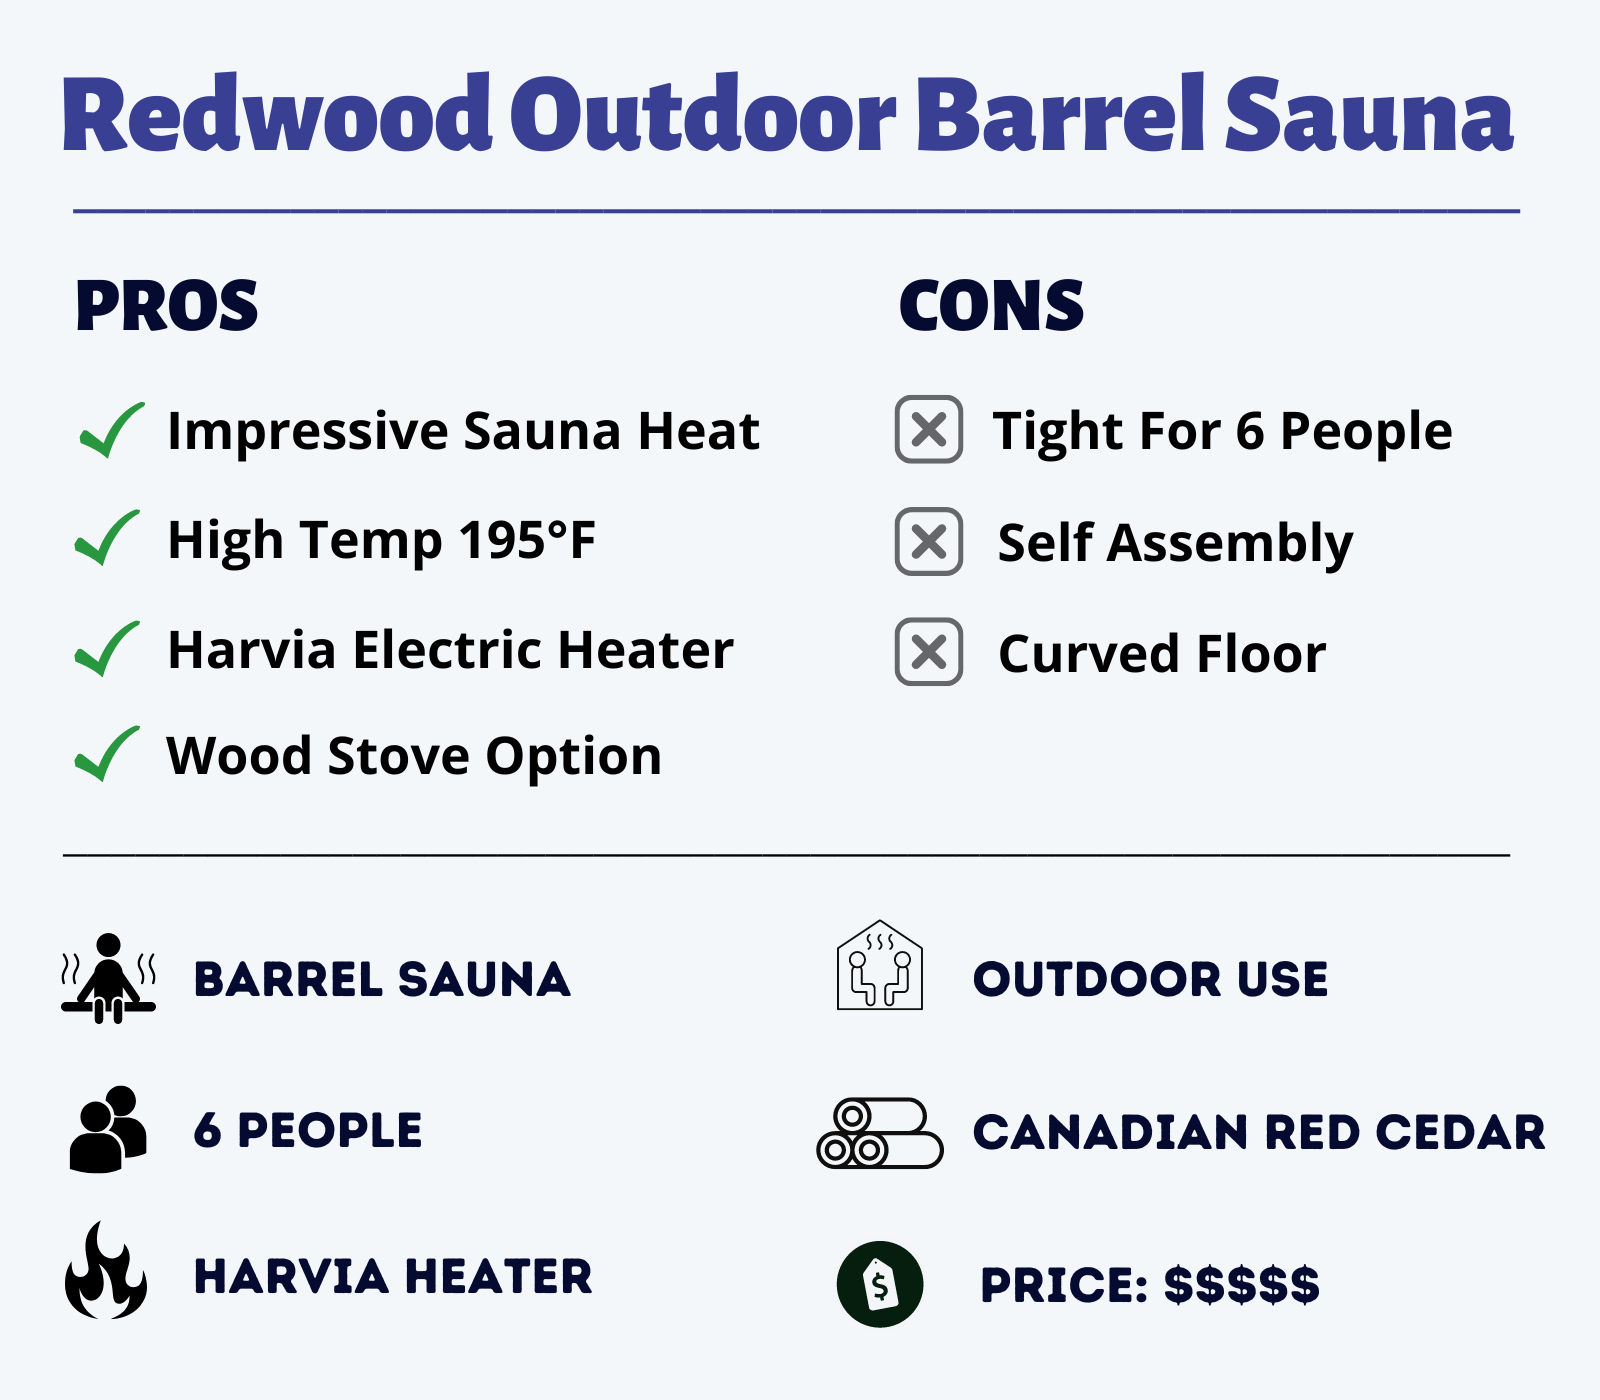 Redwood Outdoor Barrel Sauna features overview and pros and cons